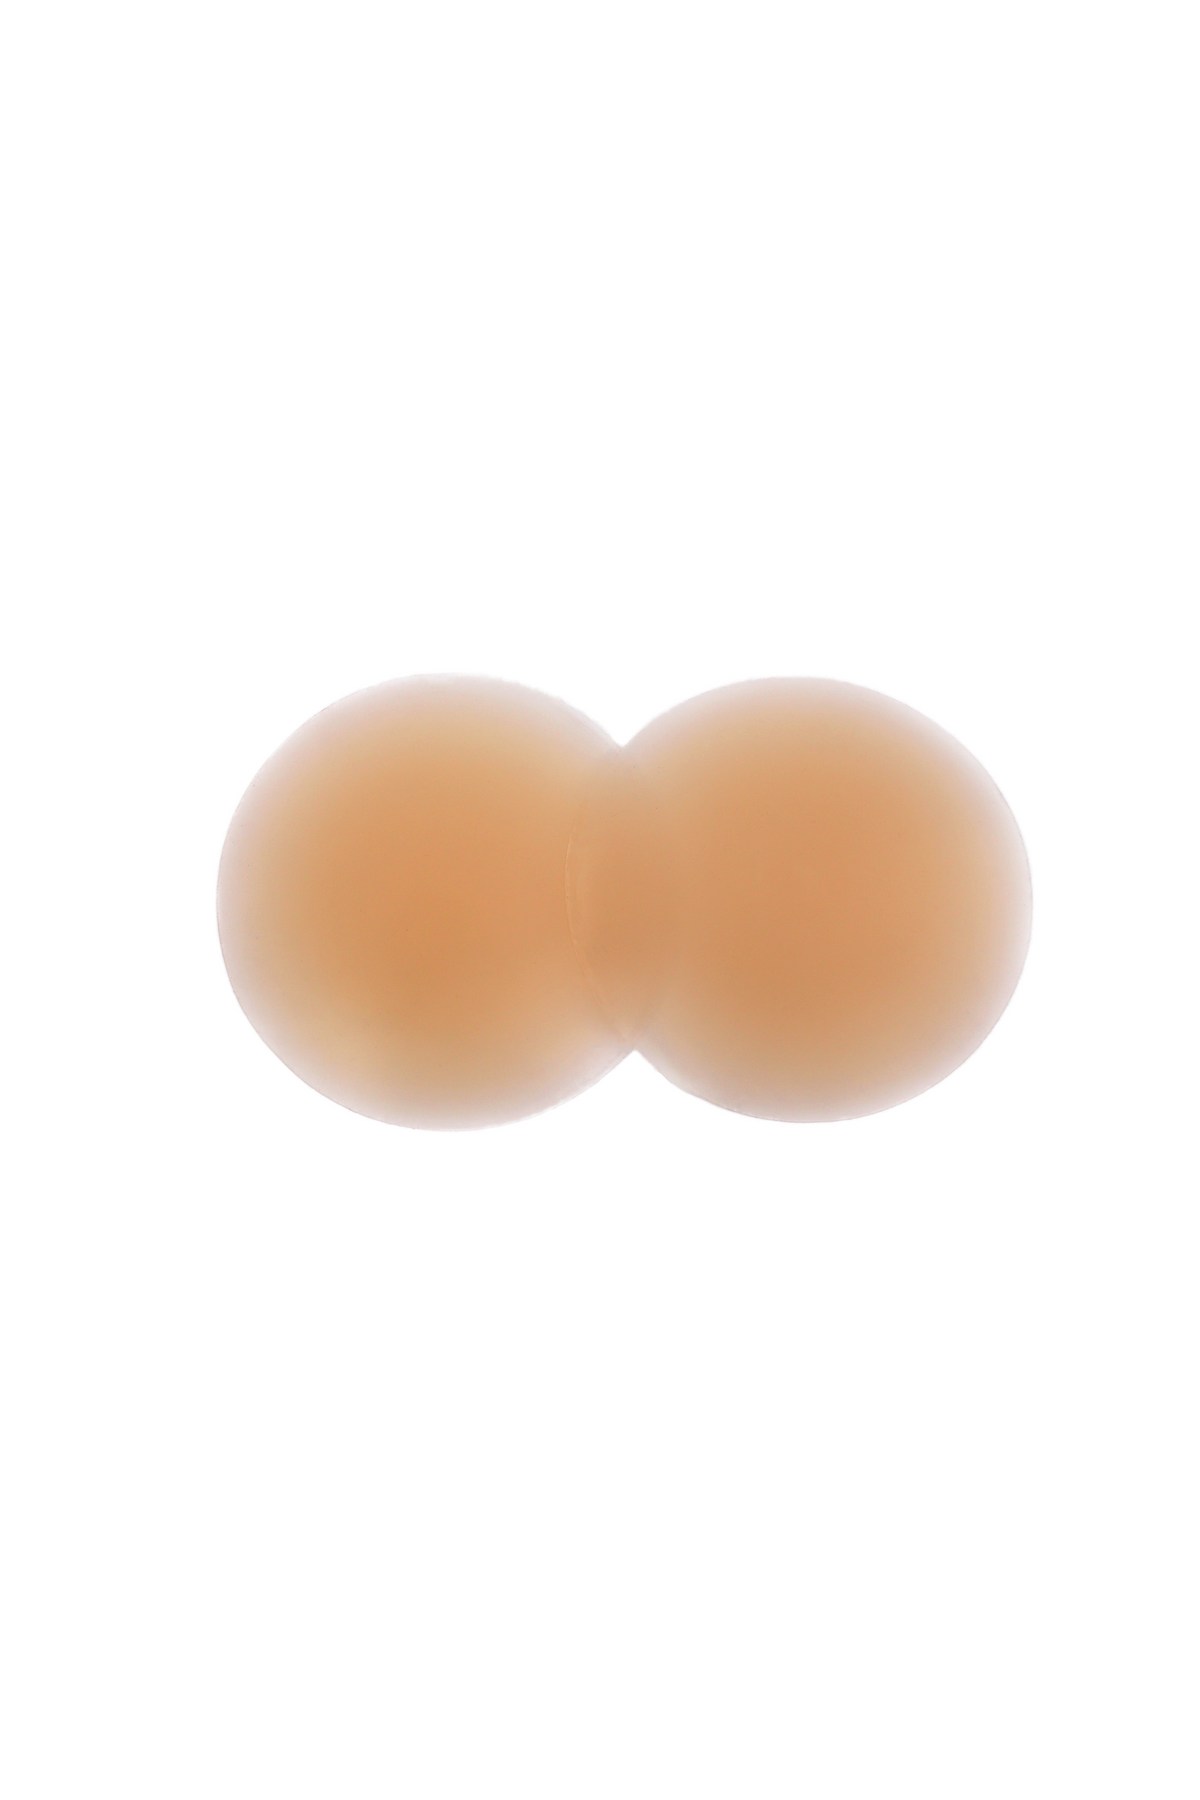 Headlight Hiders by BOOB-EEZ 6CM - Medium Tint-Made out of super-thin, mineral-based silicone, these nipple covers offer a magical, invisible barrier between breasts and clothing. Made to live in! Wear when you want coverage from sport bras during workouts, for low/backless tops &amp; dress, for fitted tops or even if you want to just go braless.-Cali Moon Boutique, Plainville Connecticut